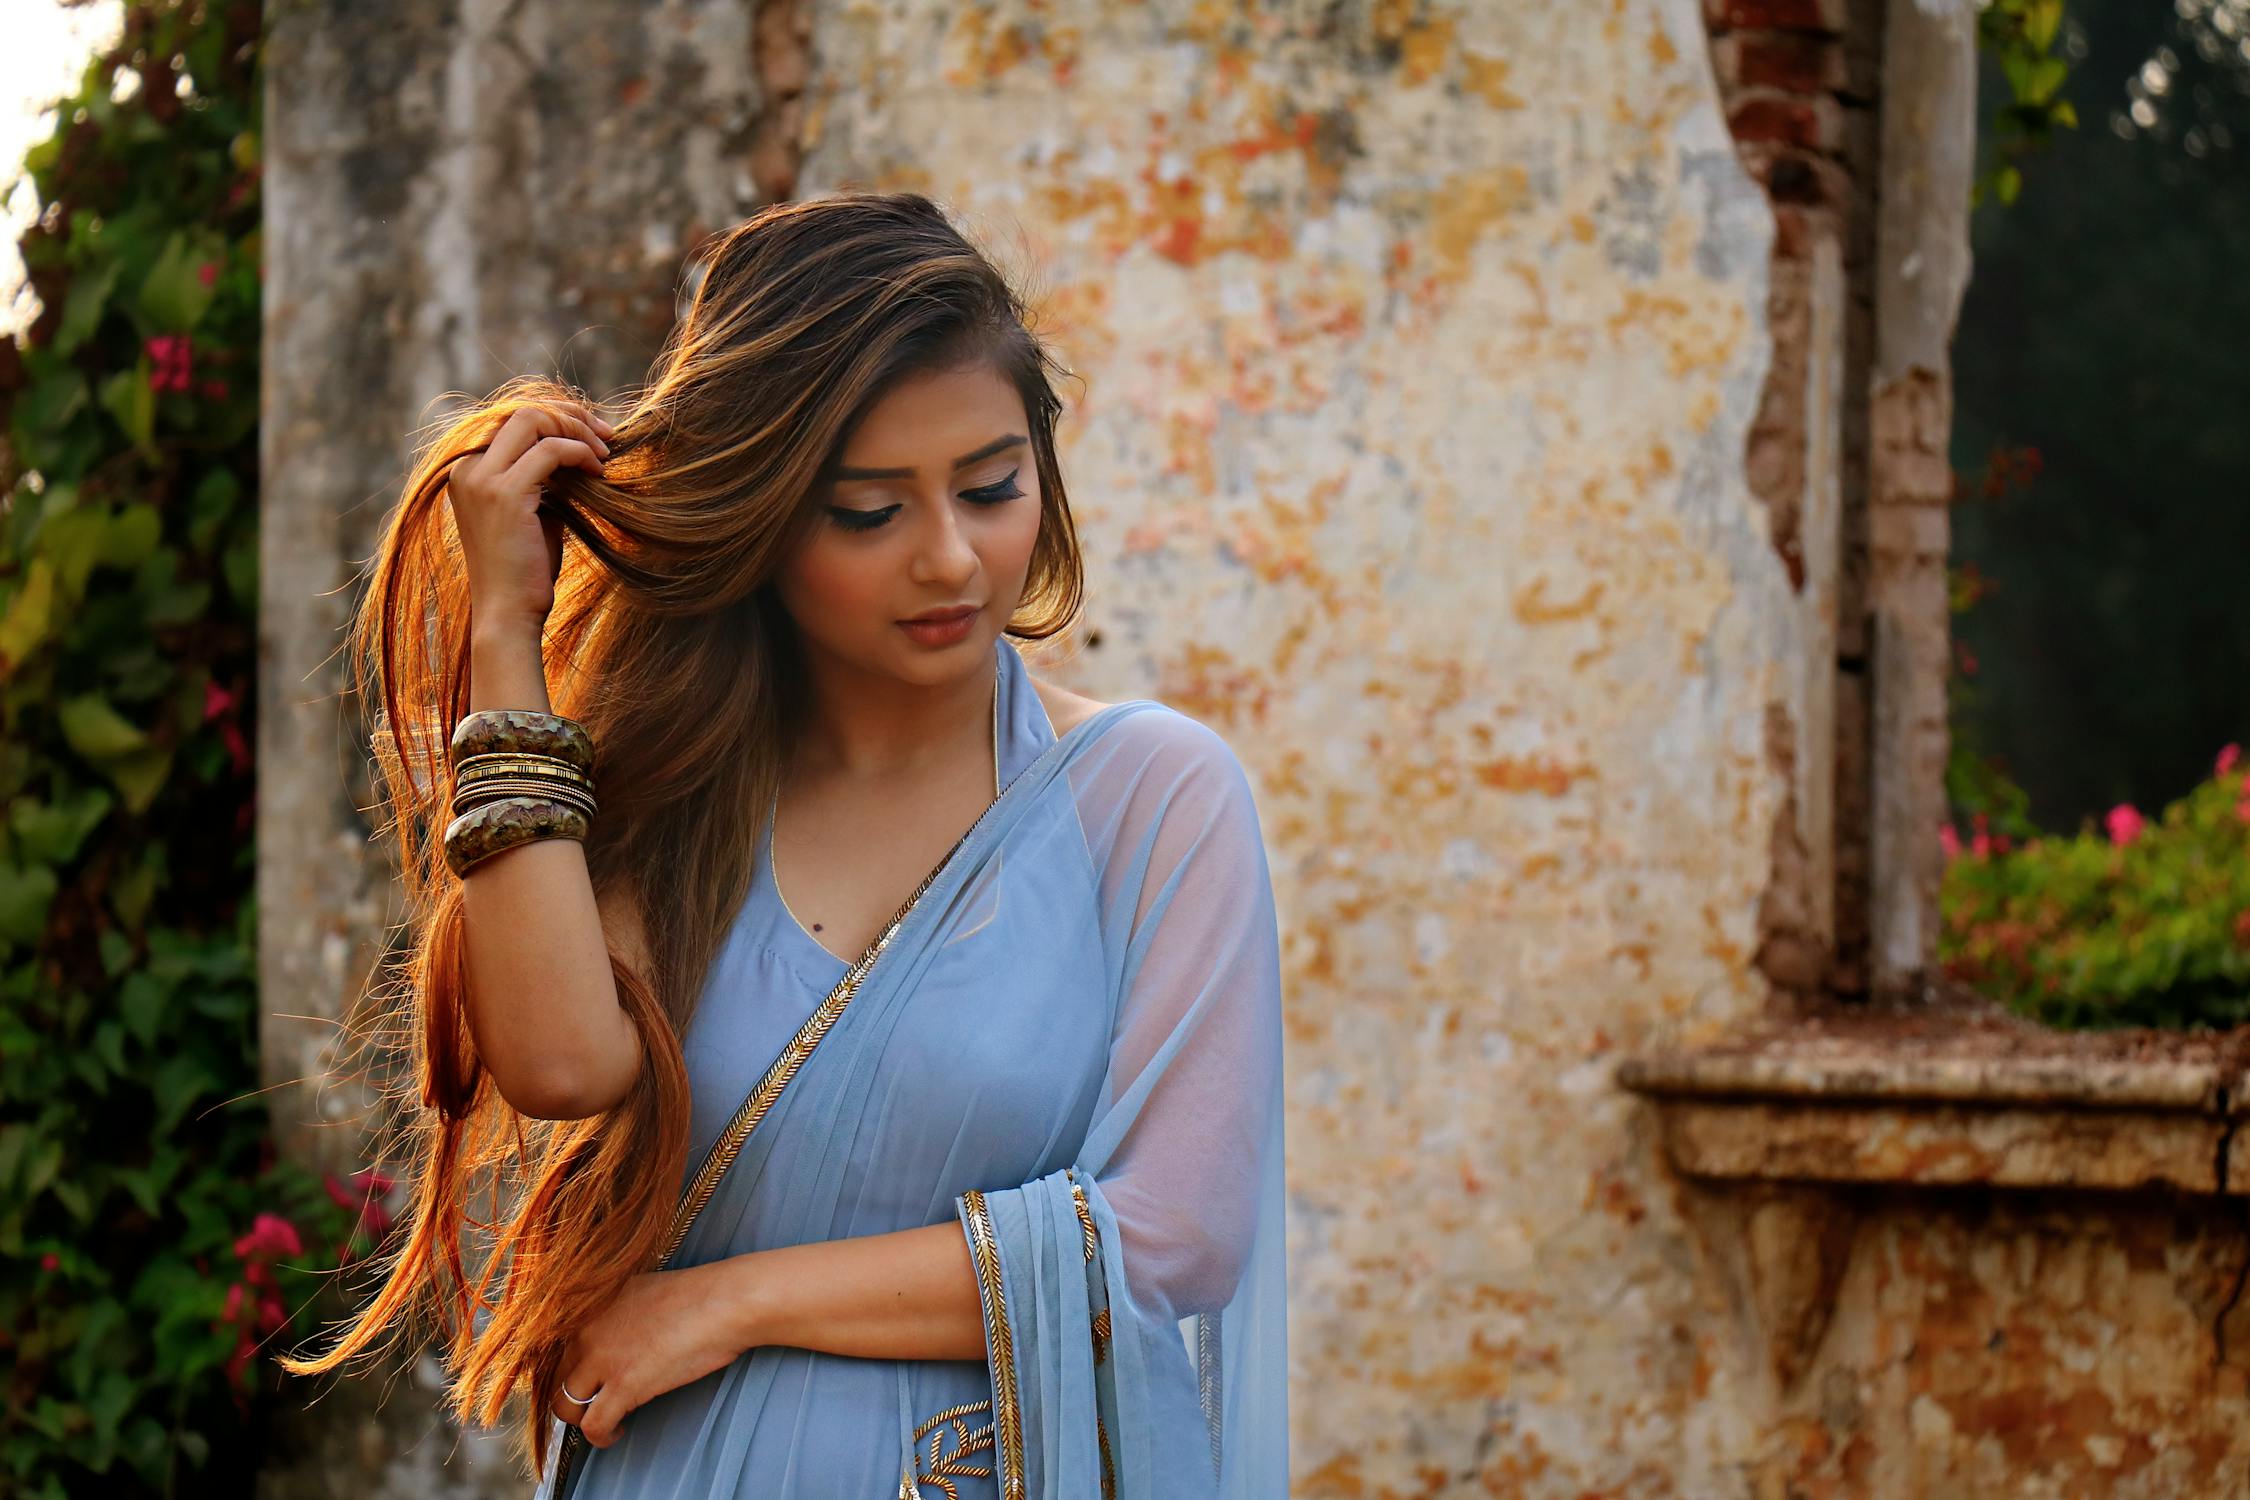 Indian Woman Photo by Samarth Singhai from Pexels: https://www.pexels.com/photo/photo-of-woman-wearing-blue-dress-1193942/